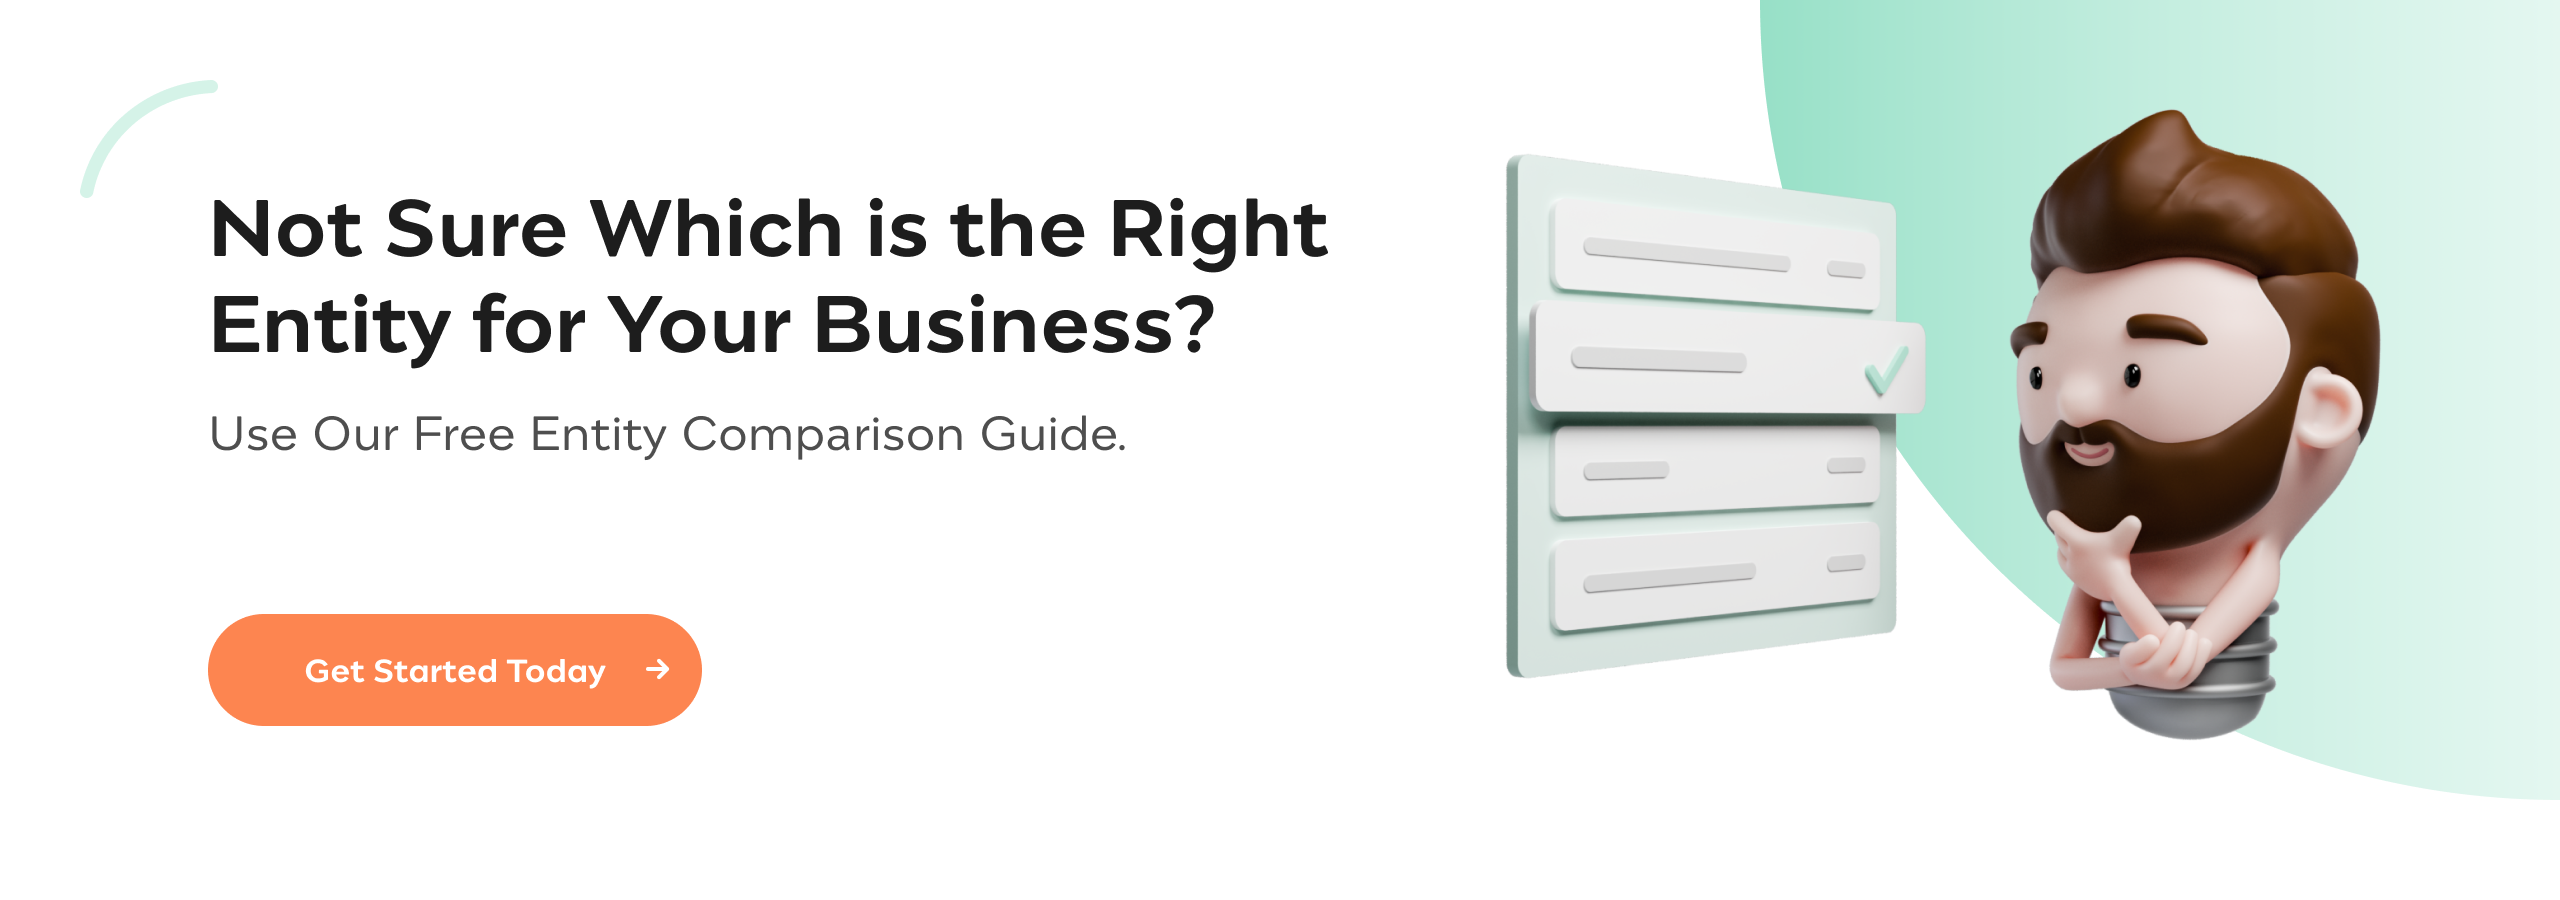 Not Sure Which is the Right Entity for Your Business? Use Our Free Entity Comparison Guide.